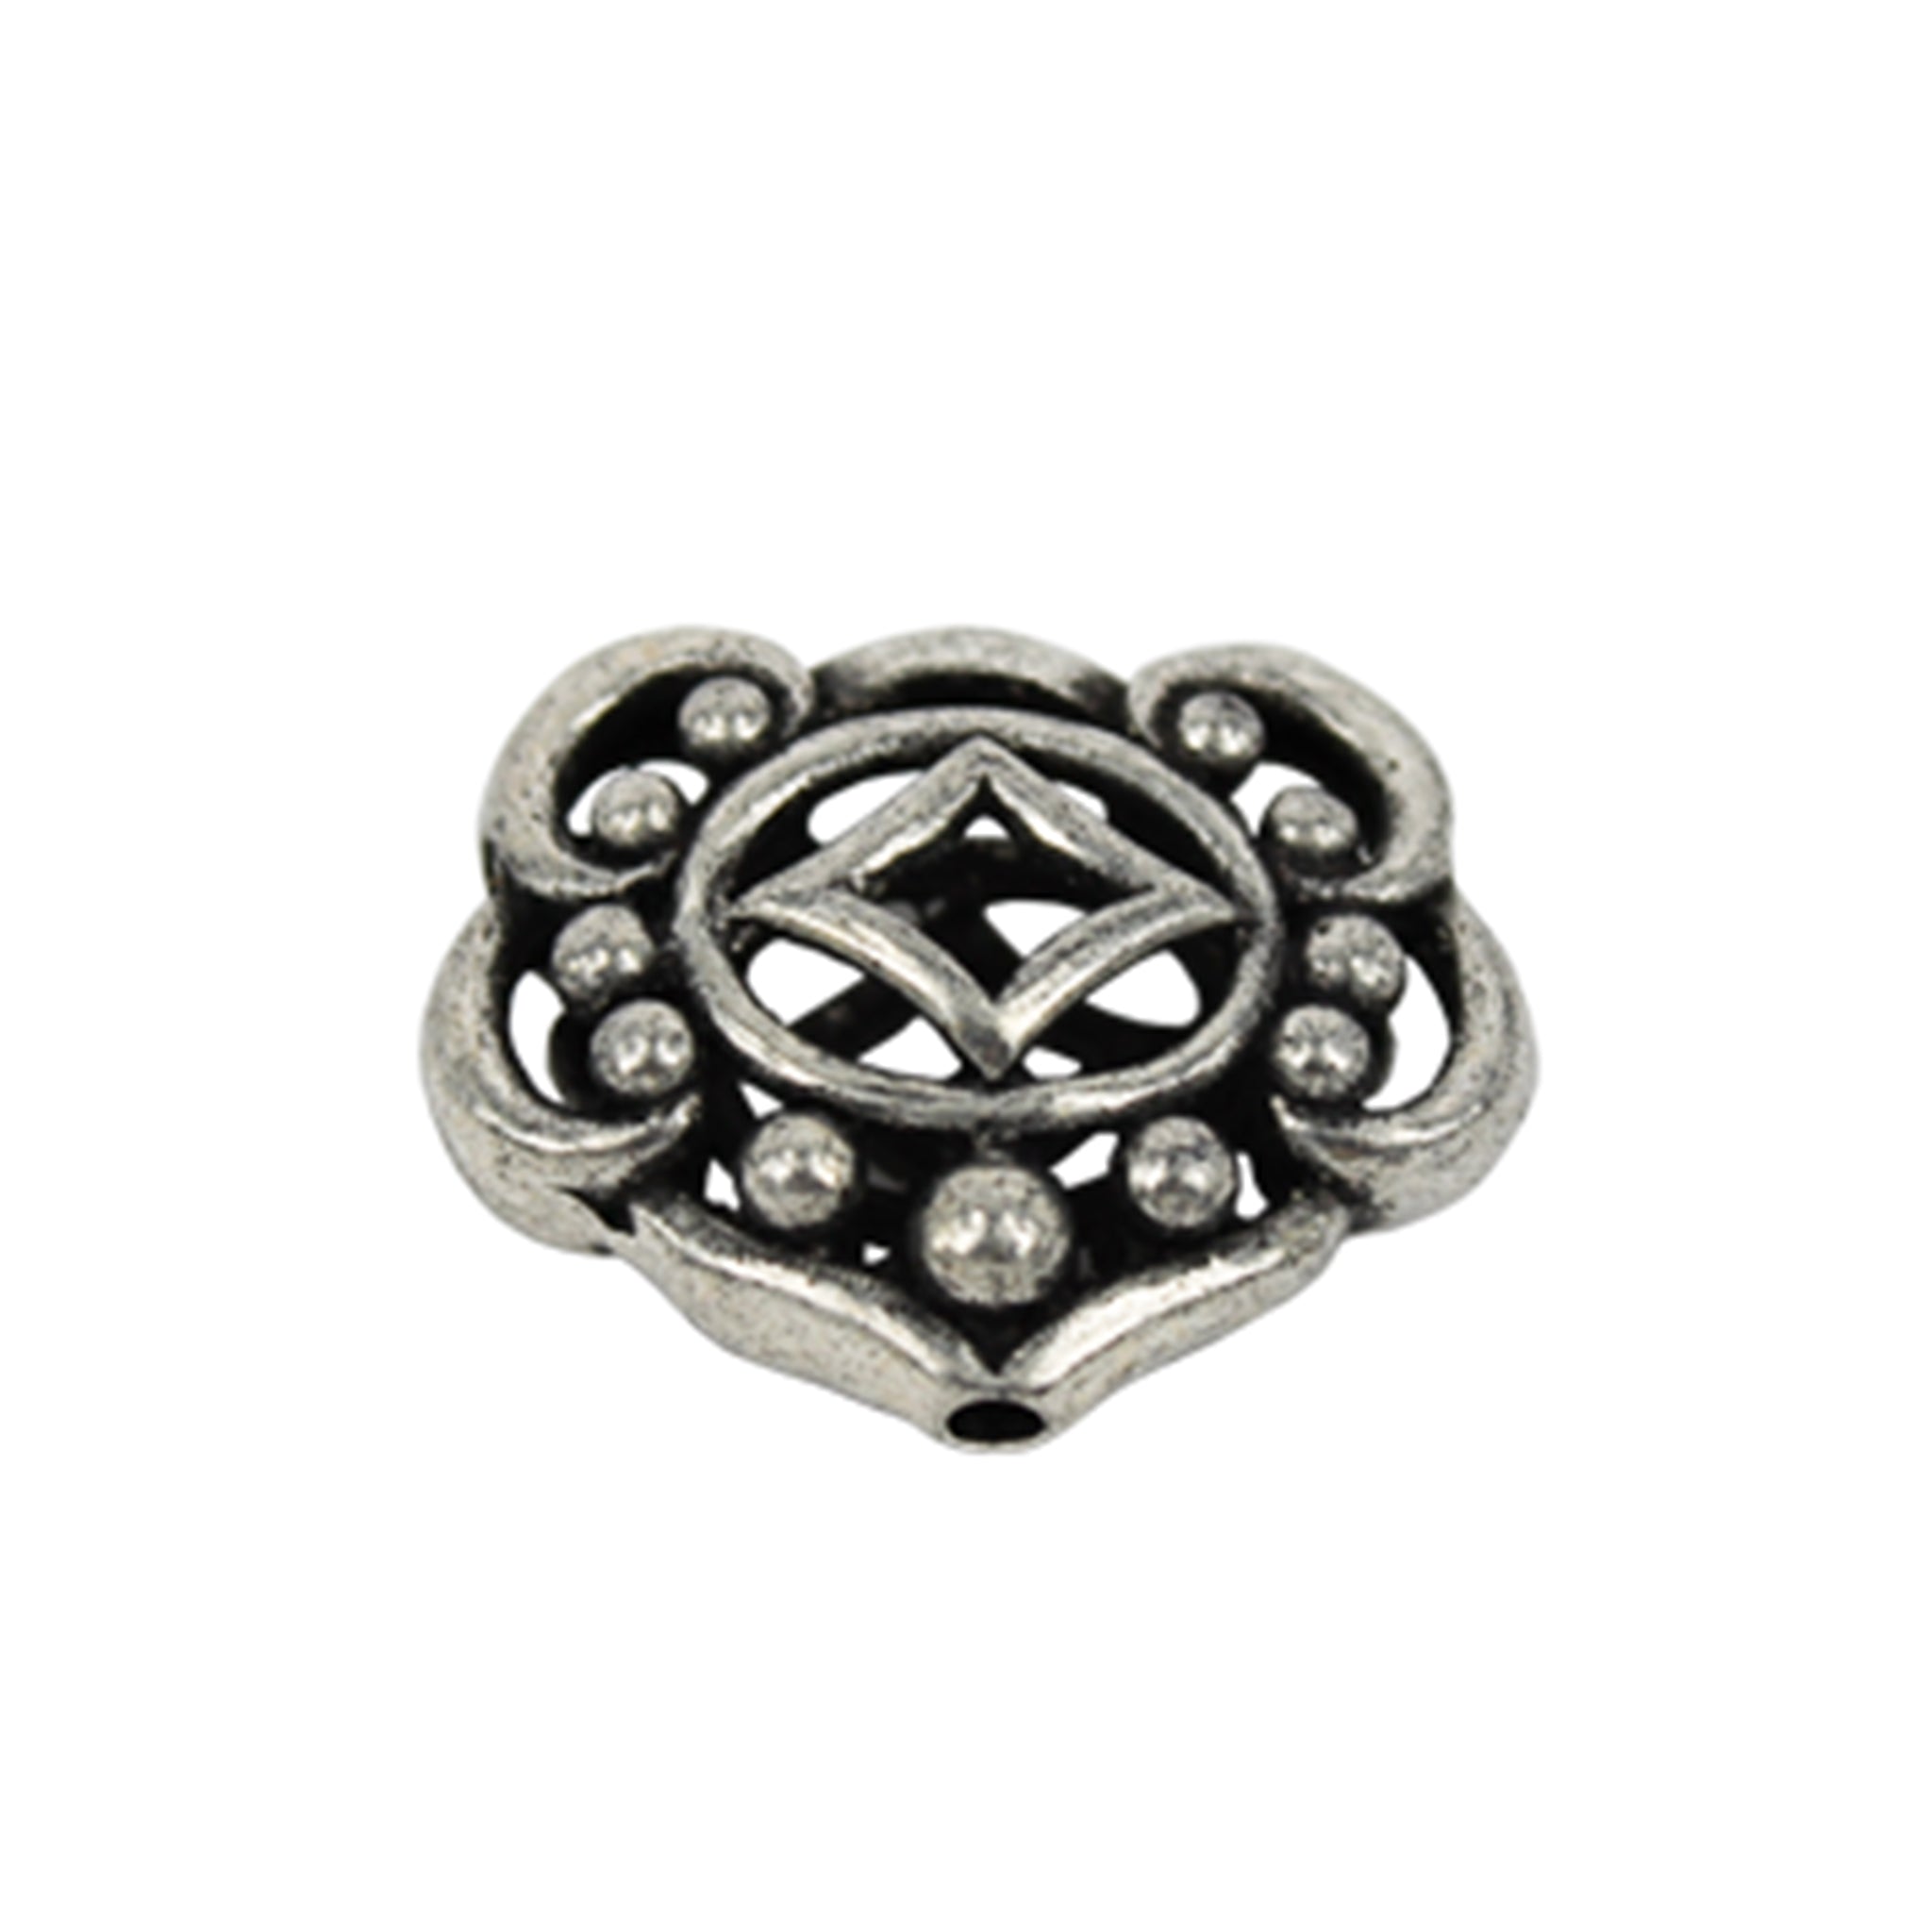 Frolic Bead in Antique Sterling Silver 17.7x21.33x7.34mm